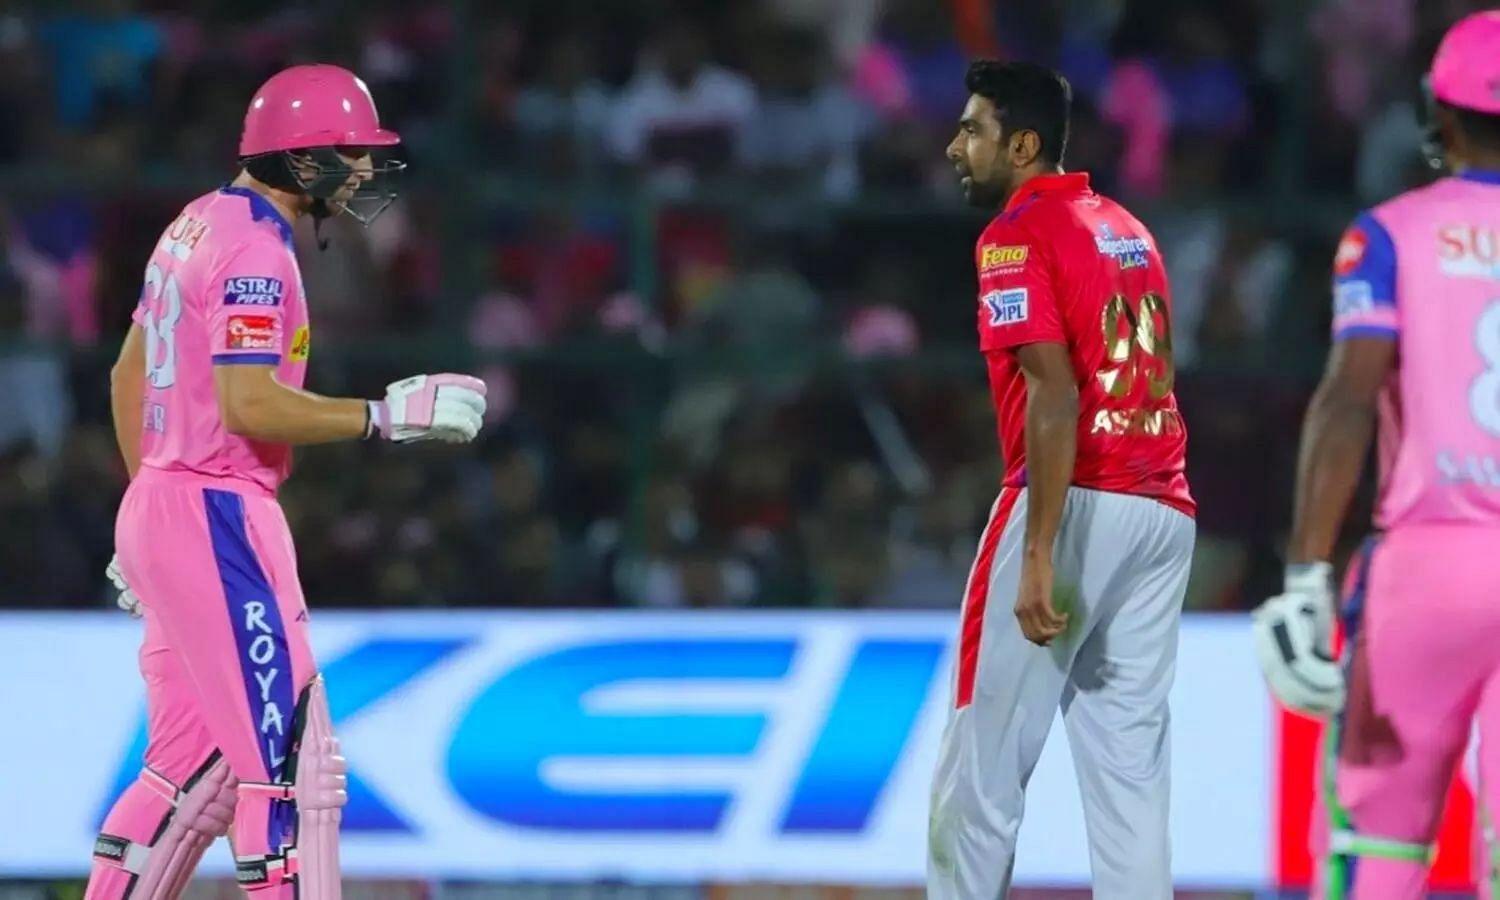 Jos Buttler (l) and Ravichandran Ashwin during the 2019 run-out incident. Pic: BCCI